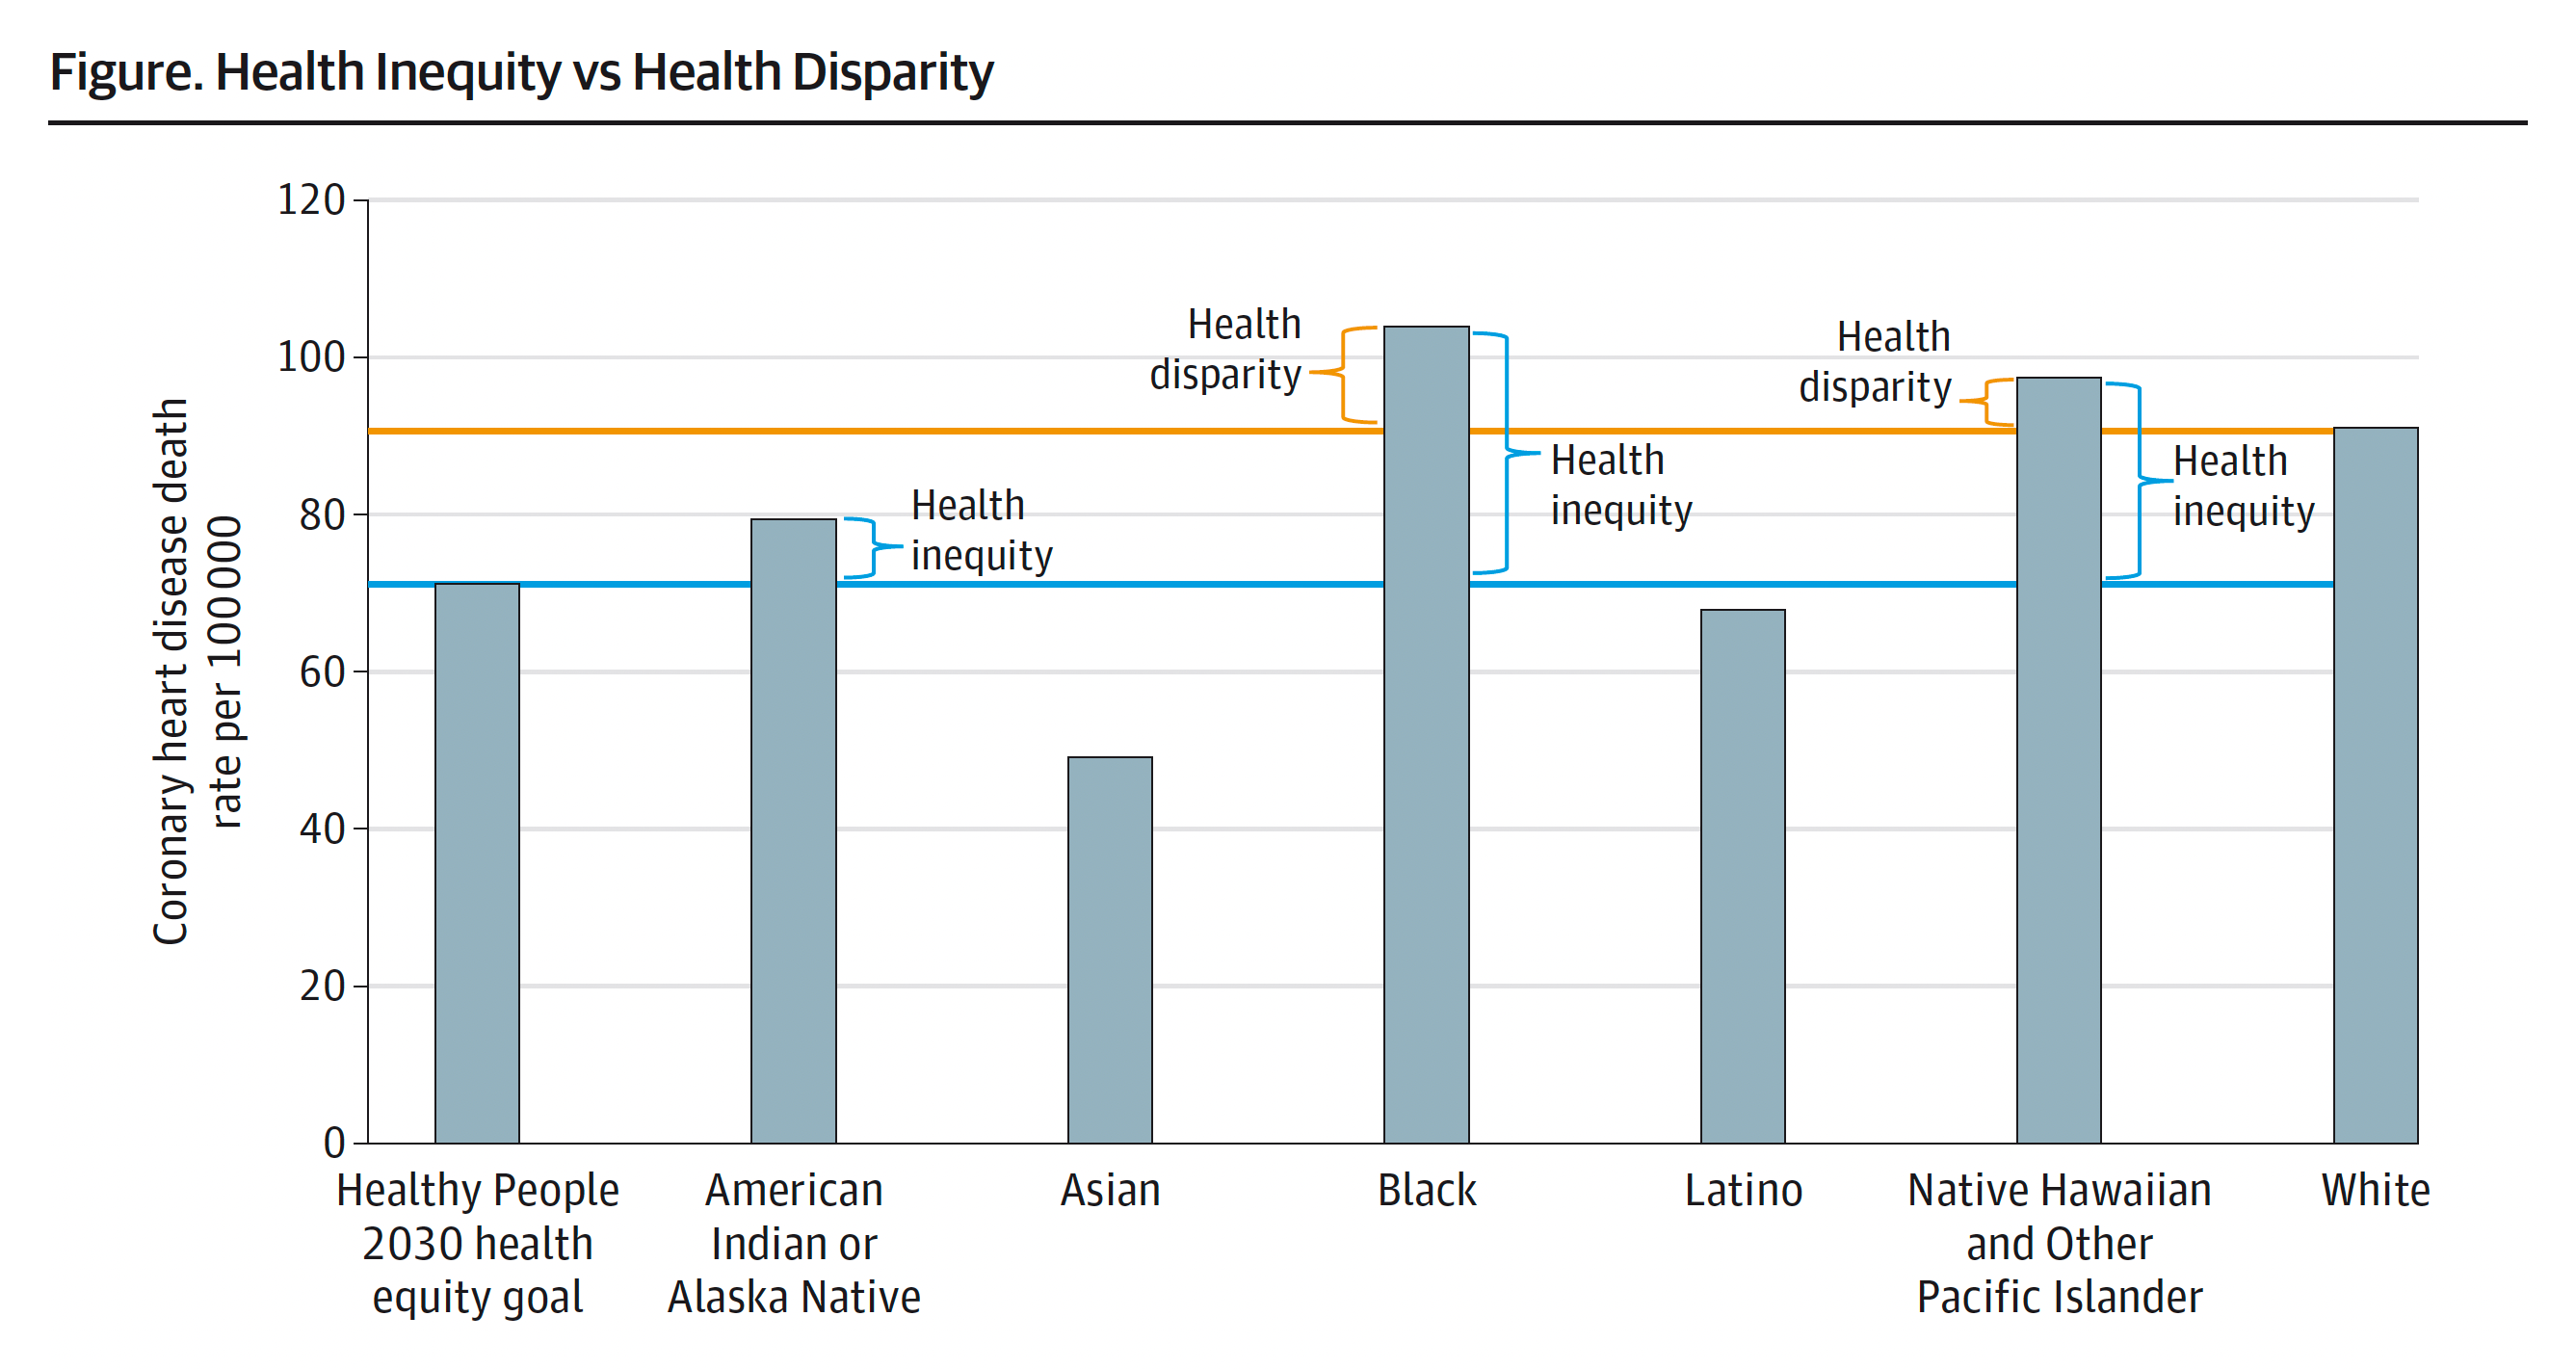 2019 Coronary heart disease death rate. Health inequity and disparity are illustrated for each of 6 racial and ethnic population groups. The baseline for health inequity (shown in blue) is the Healthy People 2030 equity goal. The baseline for health disparity (shown in orange) is the mean for the White population.